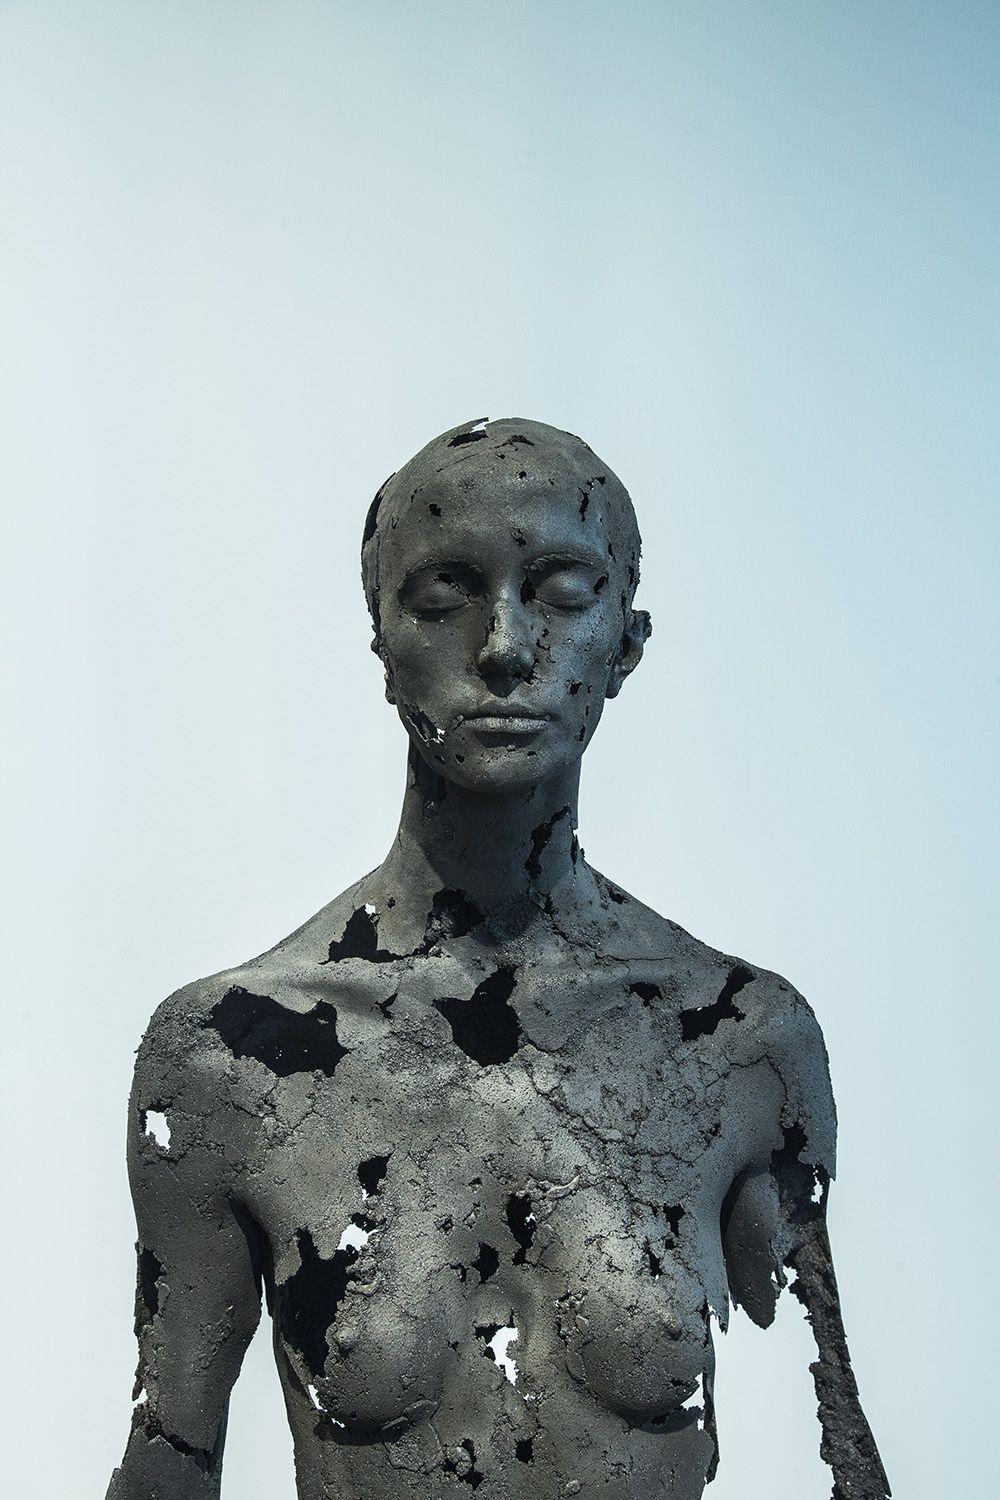 The Presence of Absence - Female (III) by Tom Price - Sculpture de charbon, corps nu en vente 3